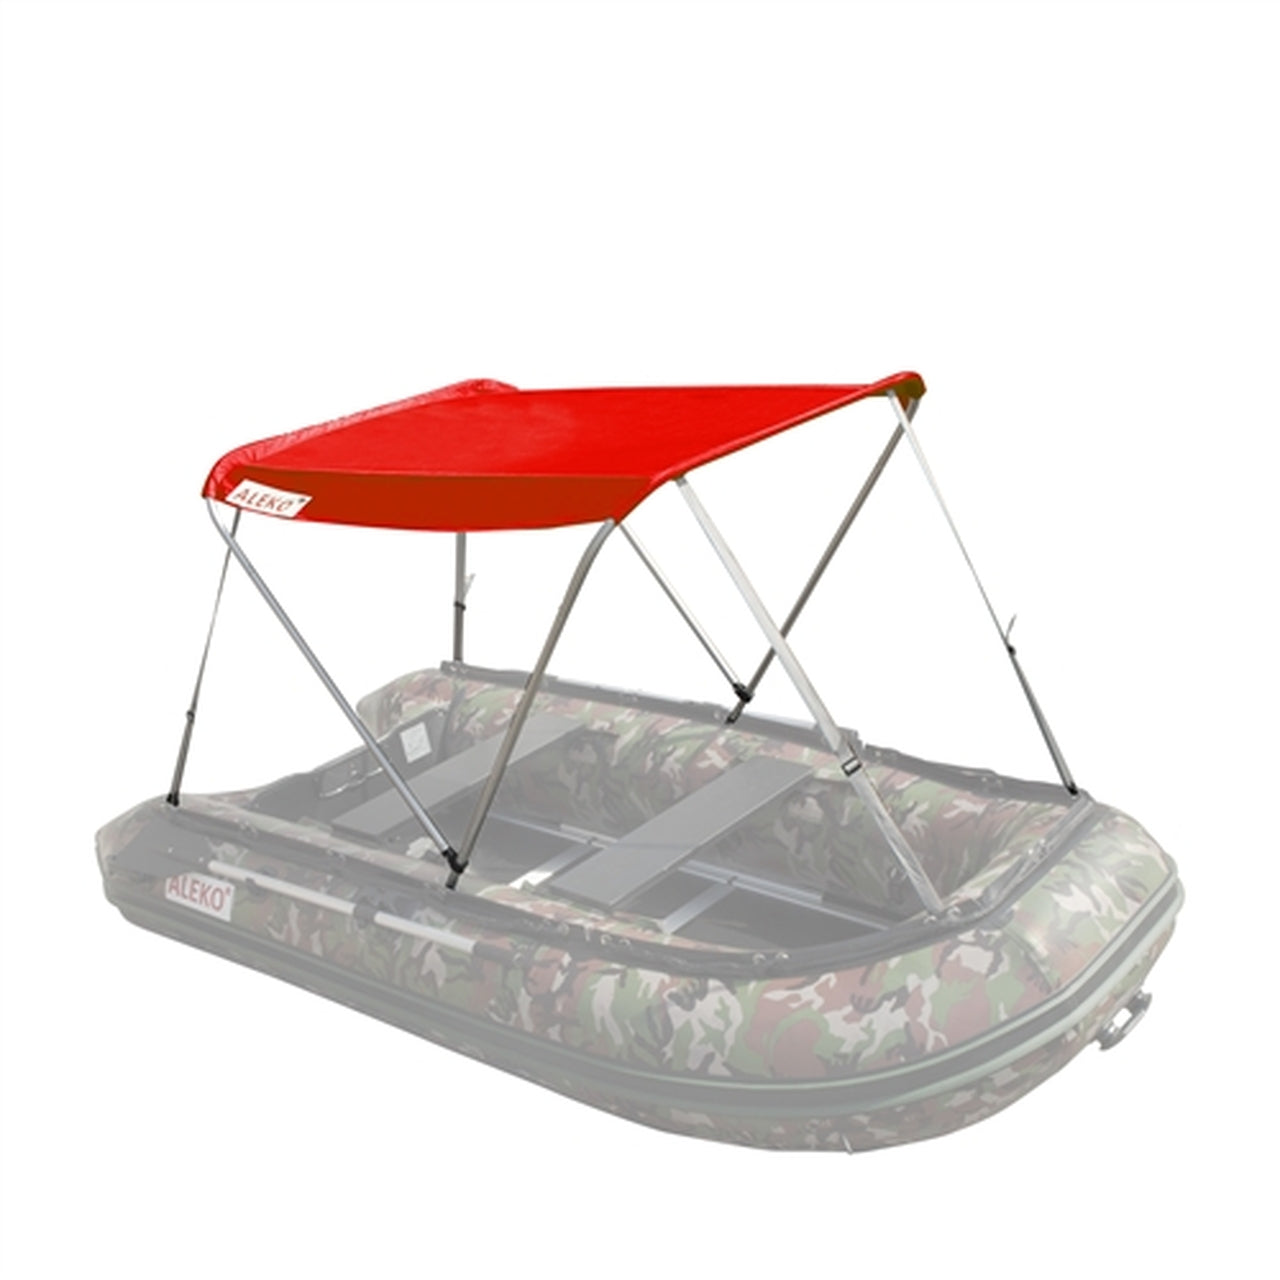 Aleko Boats Summer Canopy Tent for Inflatable Boats 12.5 ft